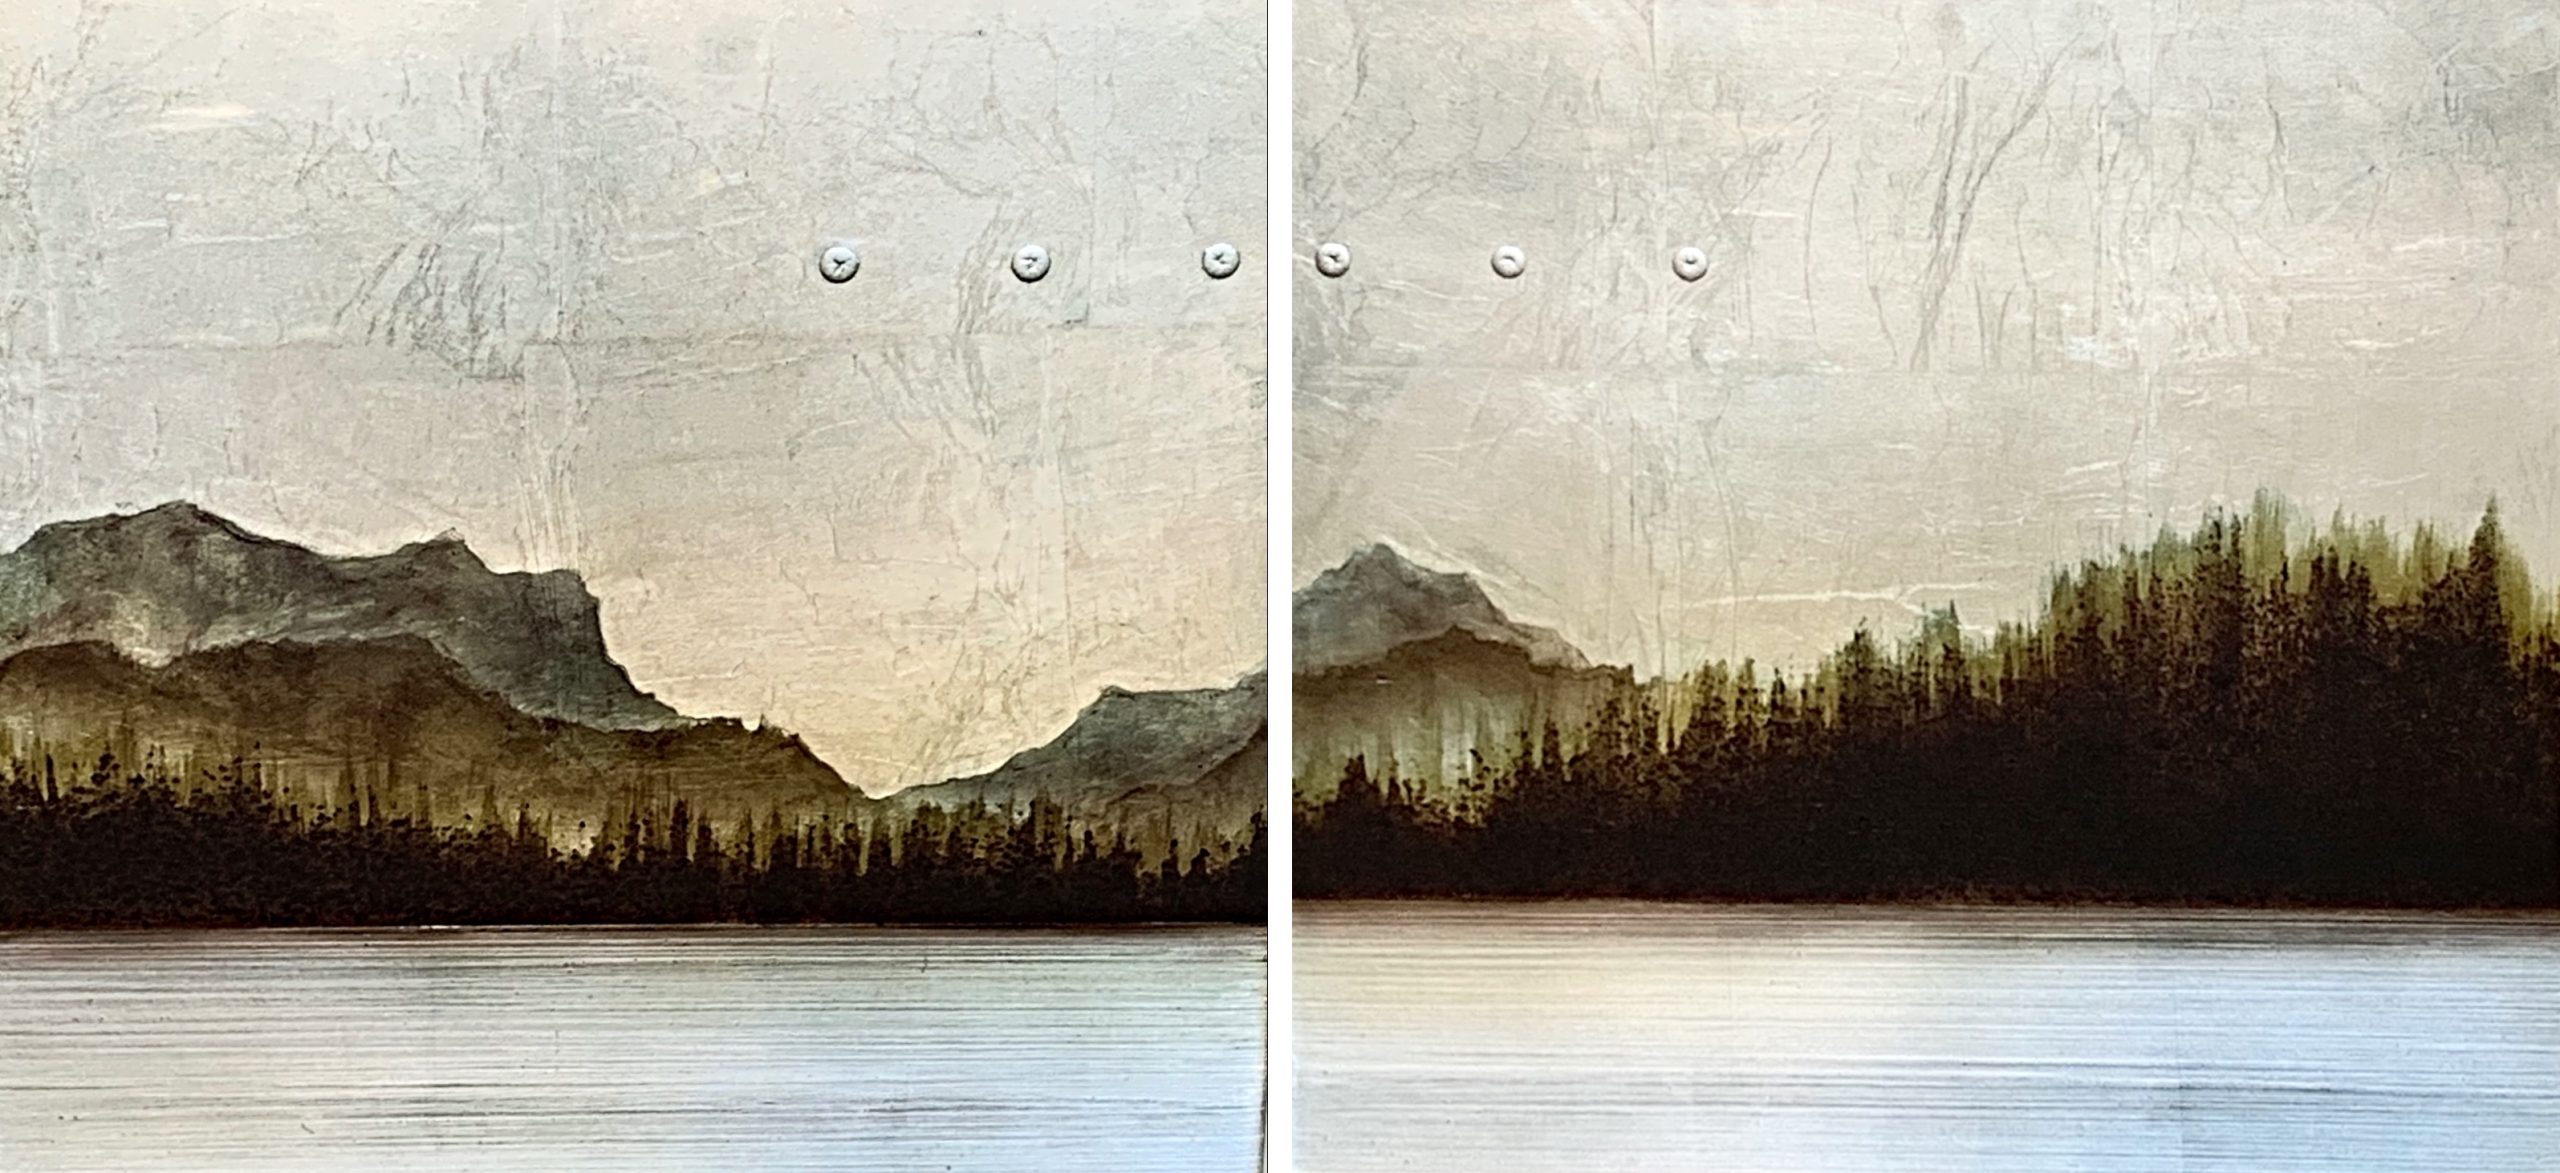 15-7 and 15-8, mixed media landscape paintings by David Graff | Effusion Art Gallery + Cast Glass Studio, Invermere BC